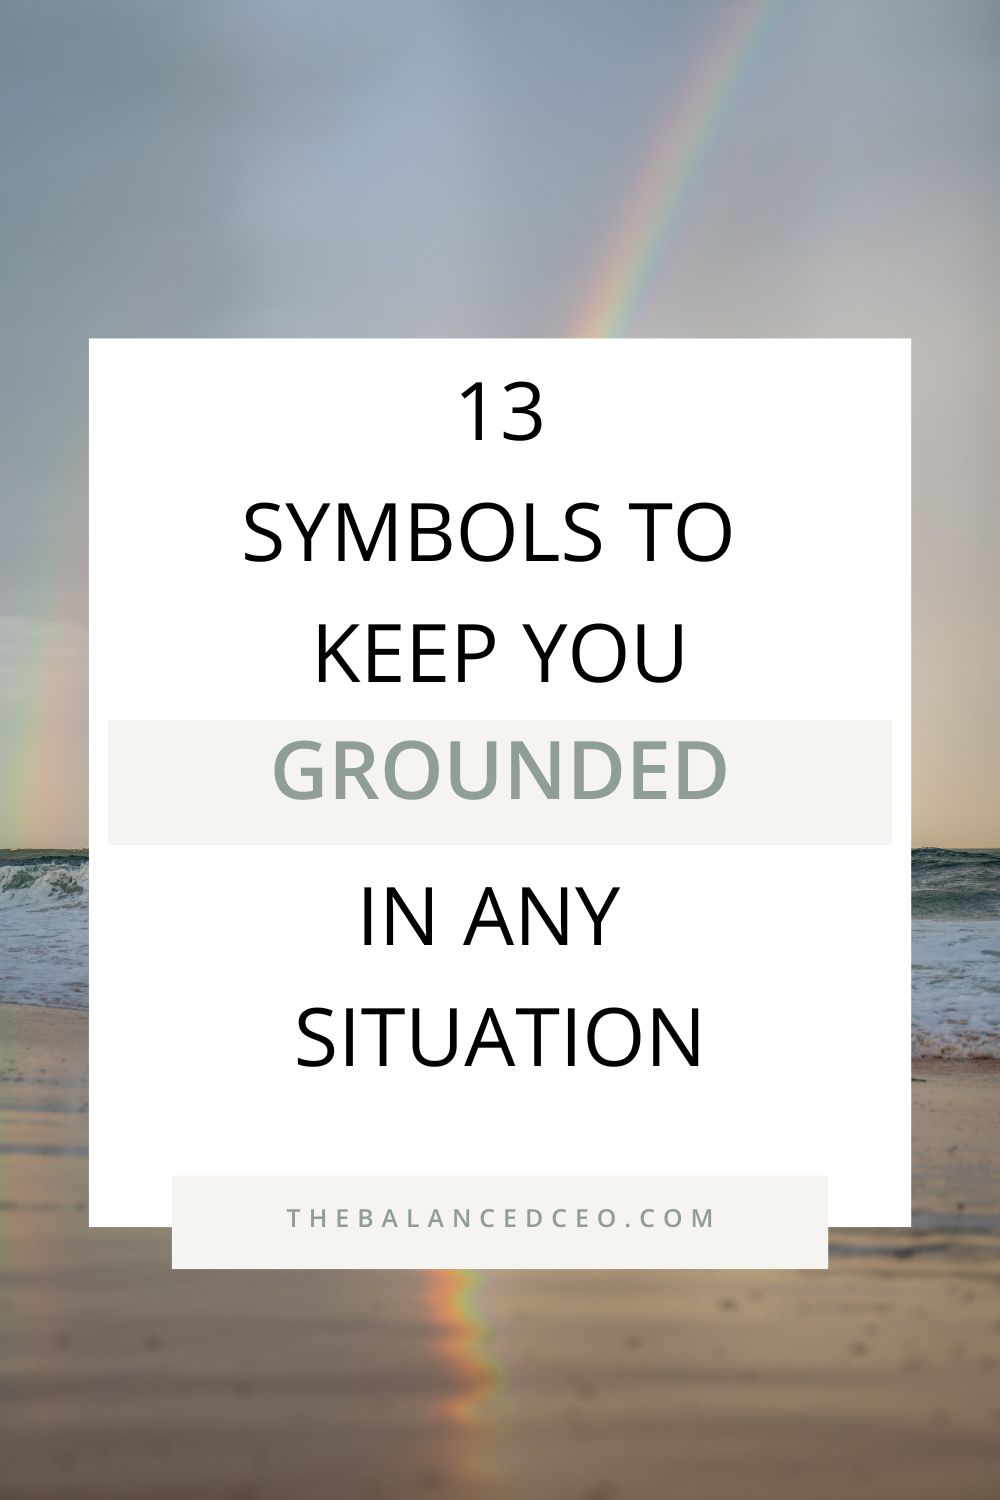 13 Symbols to Keep You Grounded in Any Situation